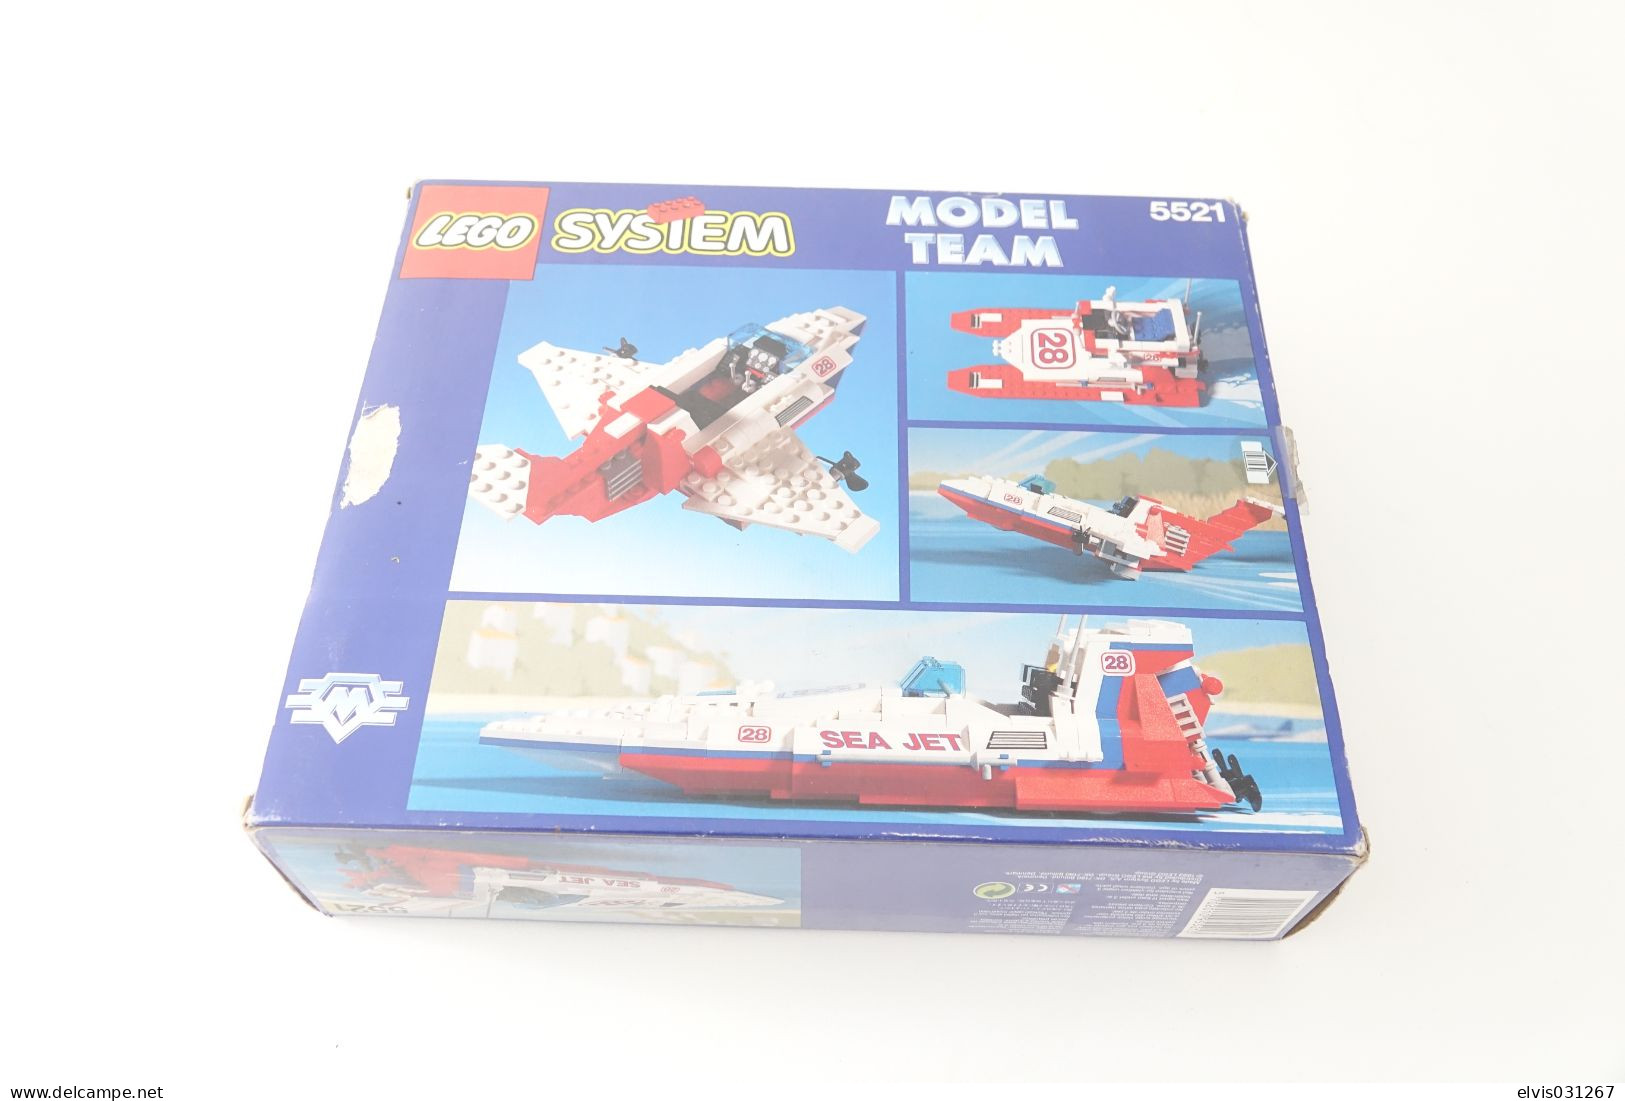 LEGO - 5521 Sea Jet With Box And Manual Booklet - Original Lego 1993 - Vintage - Catalogs